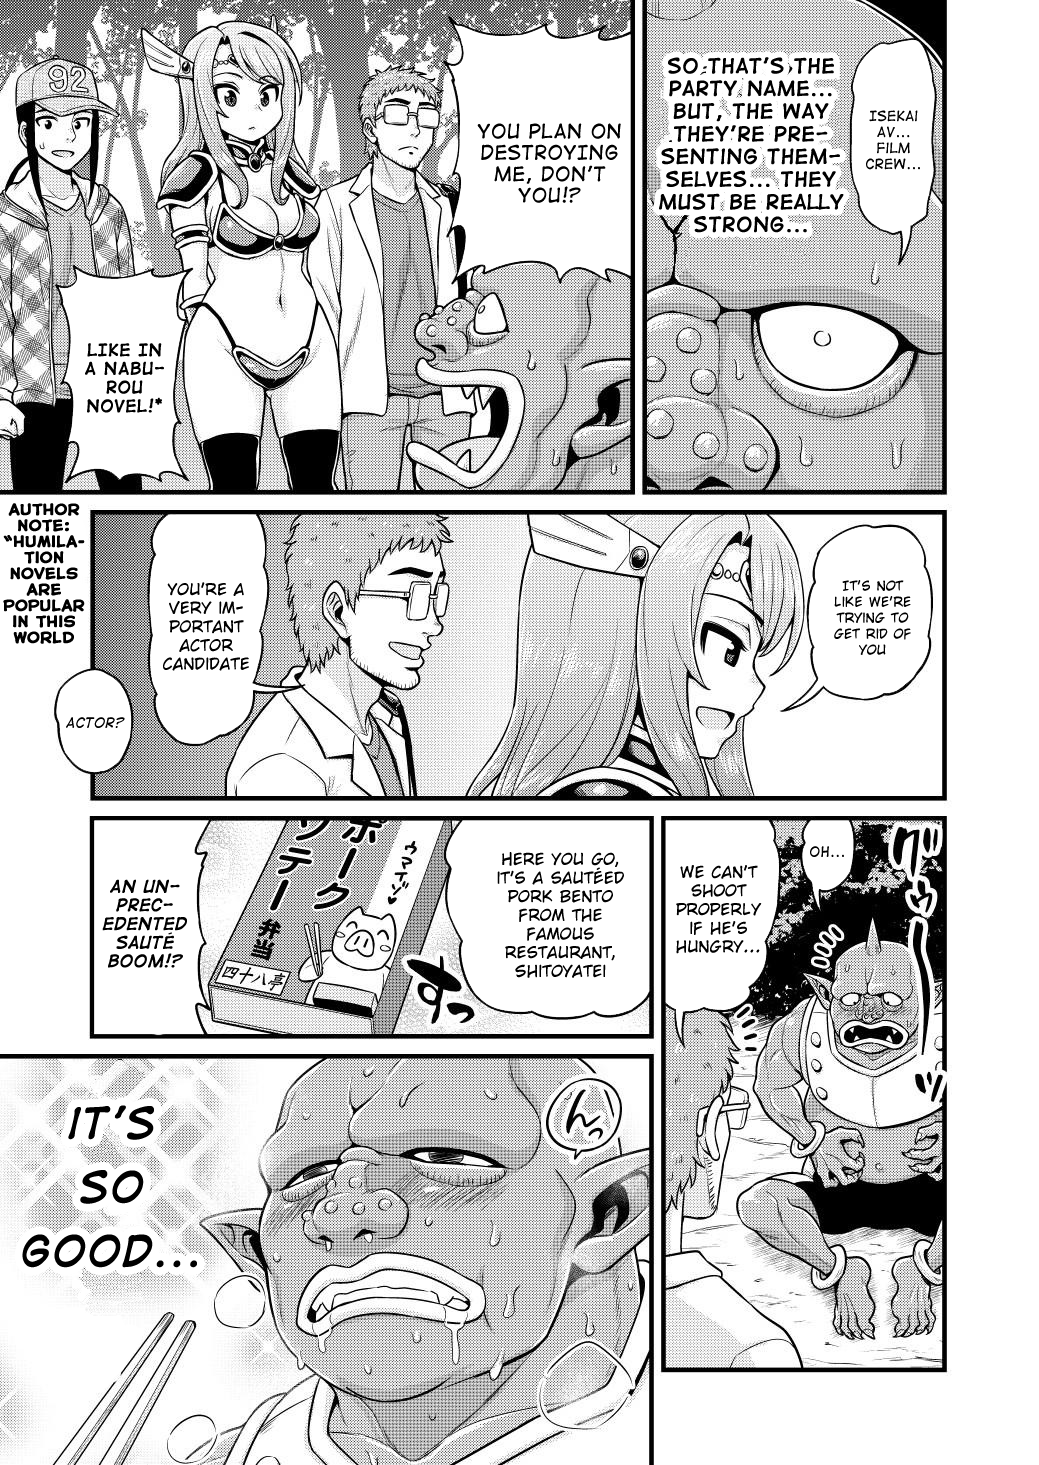 Filming Adult Videos in Another World - Chapter 5 Page 8